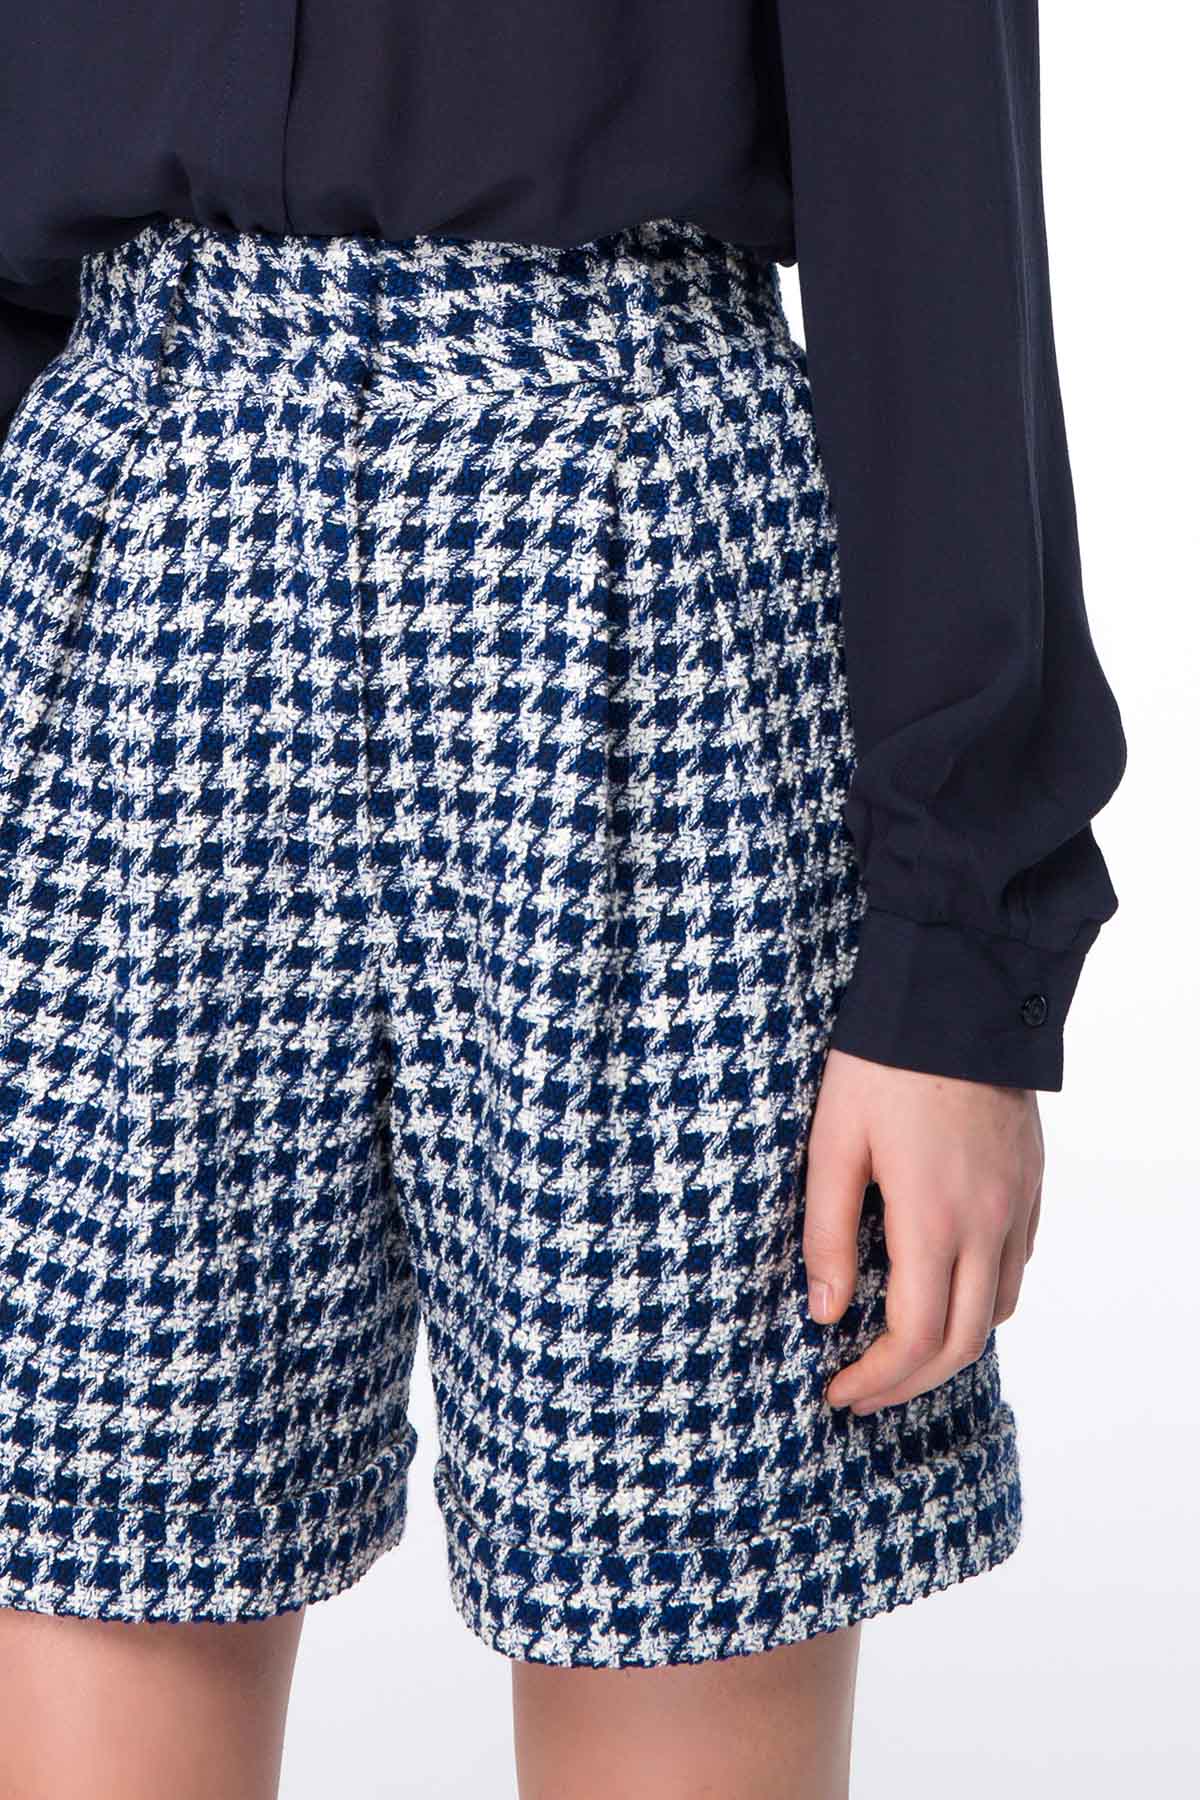 Shorts with blue&white houndstooth print, photo 4